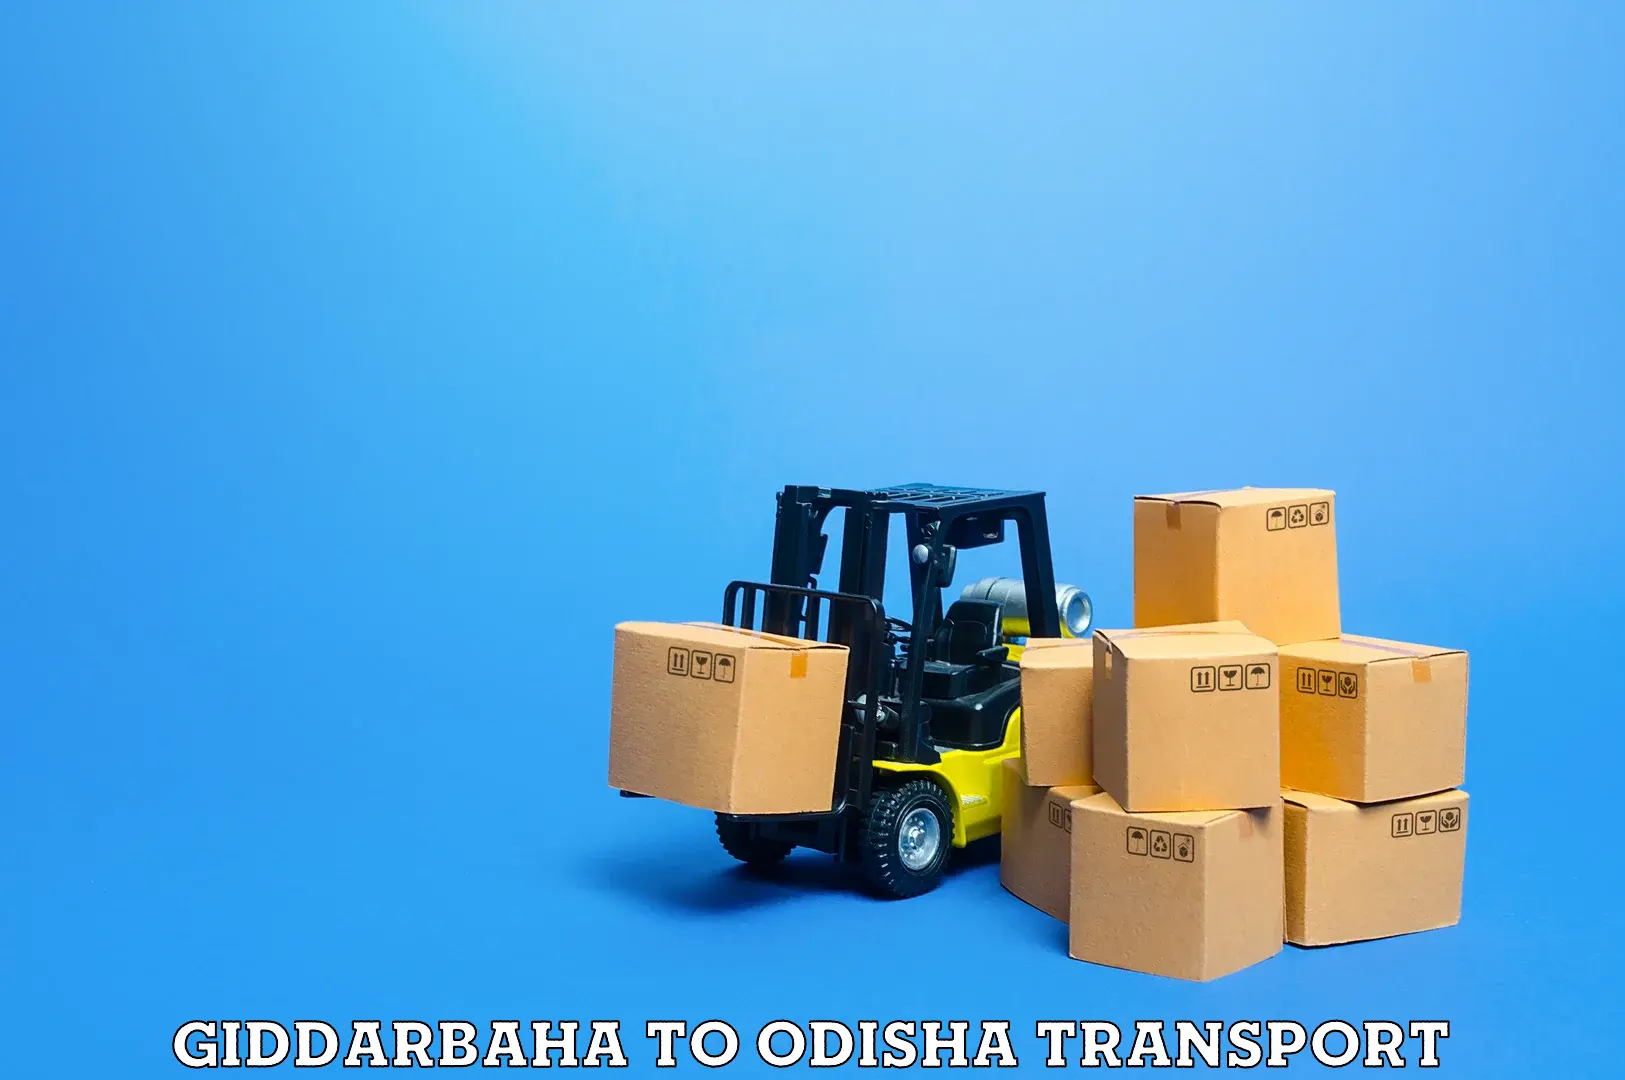 Commercial transport service in Giddarbaha to Bhadrak